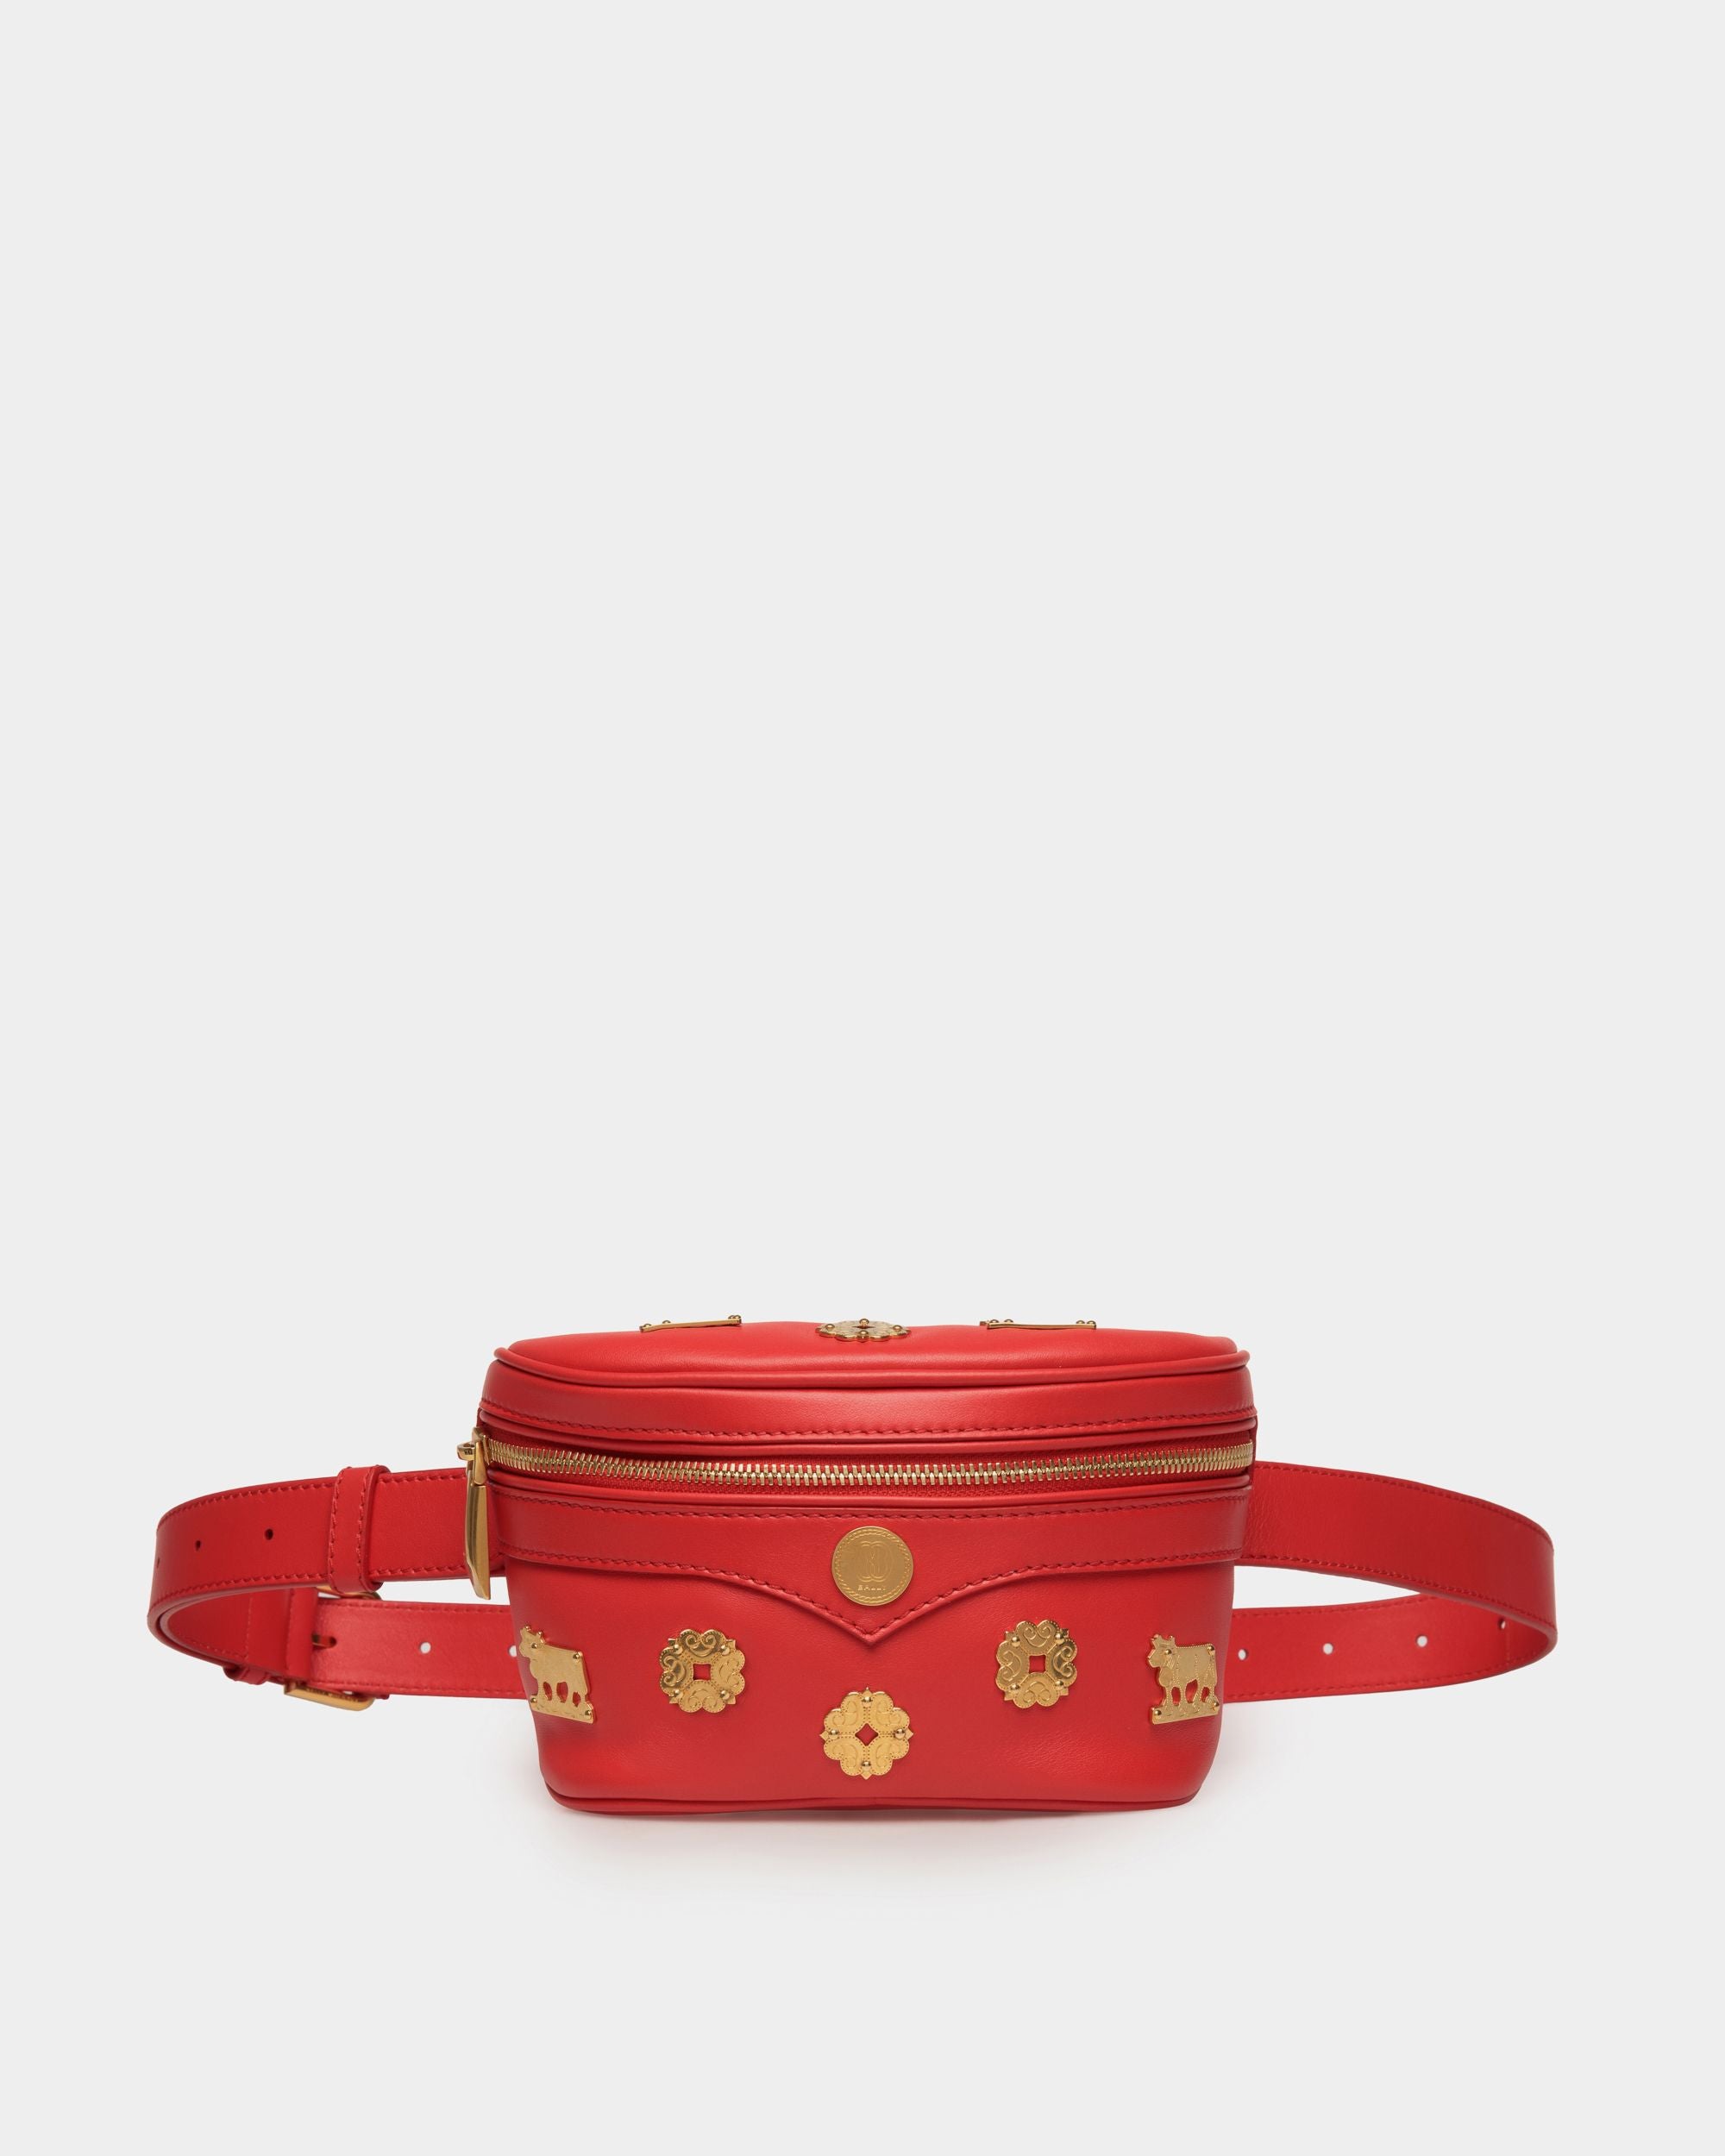 Moutain | Women's Belt Bag  in Red Leather | Bally | Still Life Front